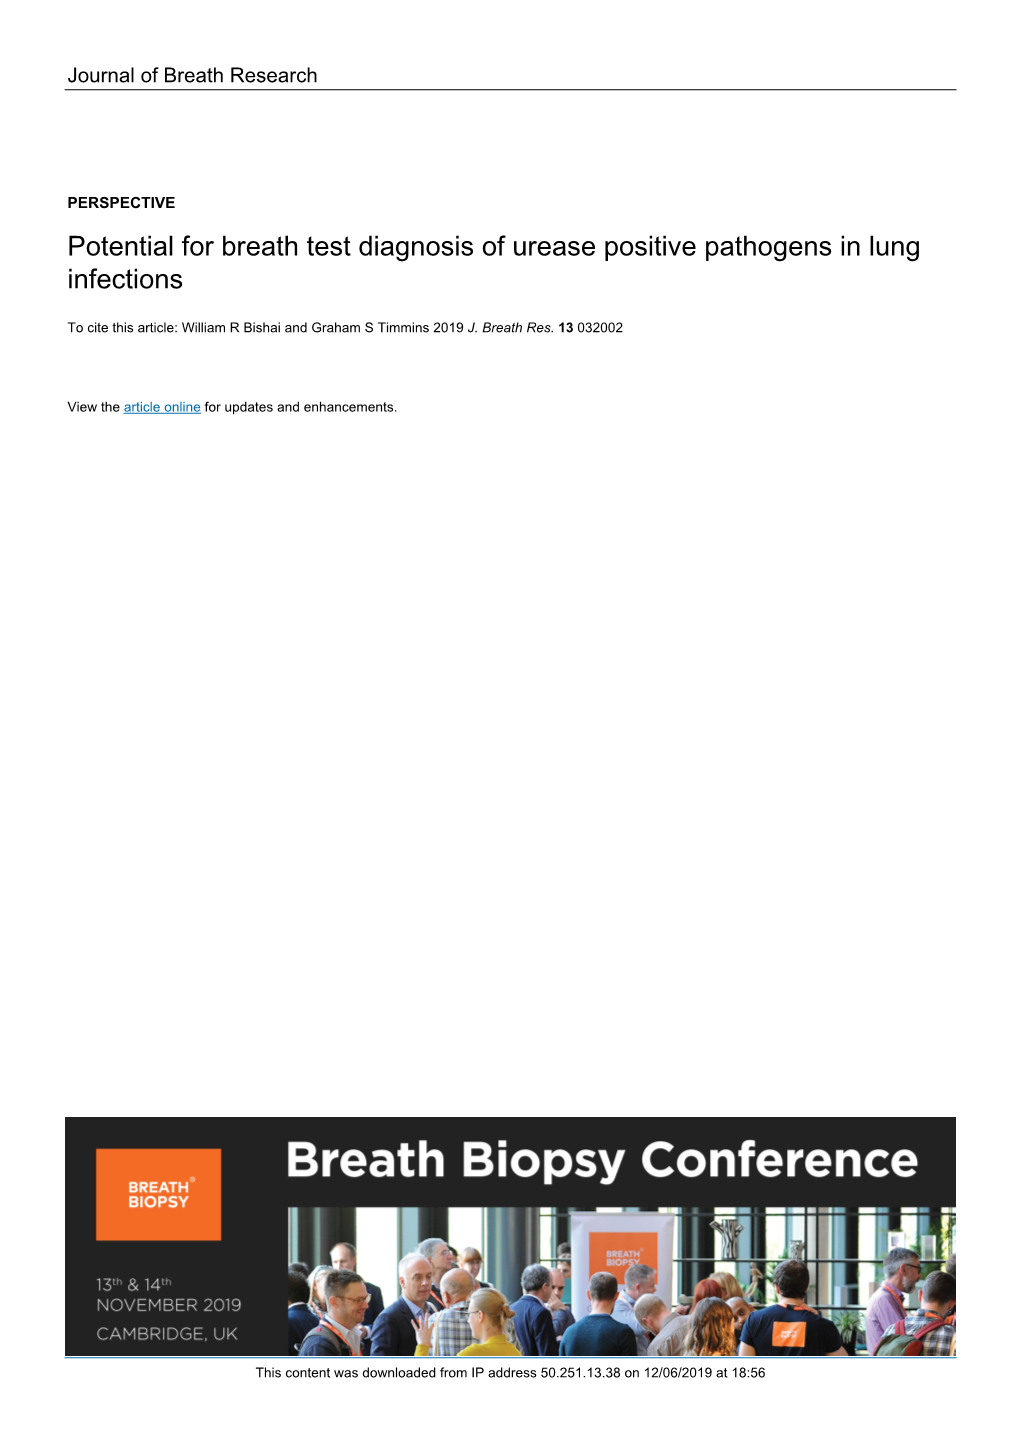 Potential for Breath Test Diagnosis of Urease Positive Pathogens in Lung Infections